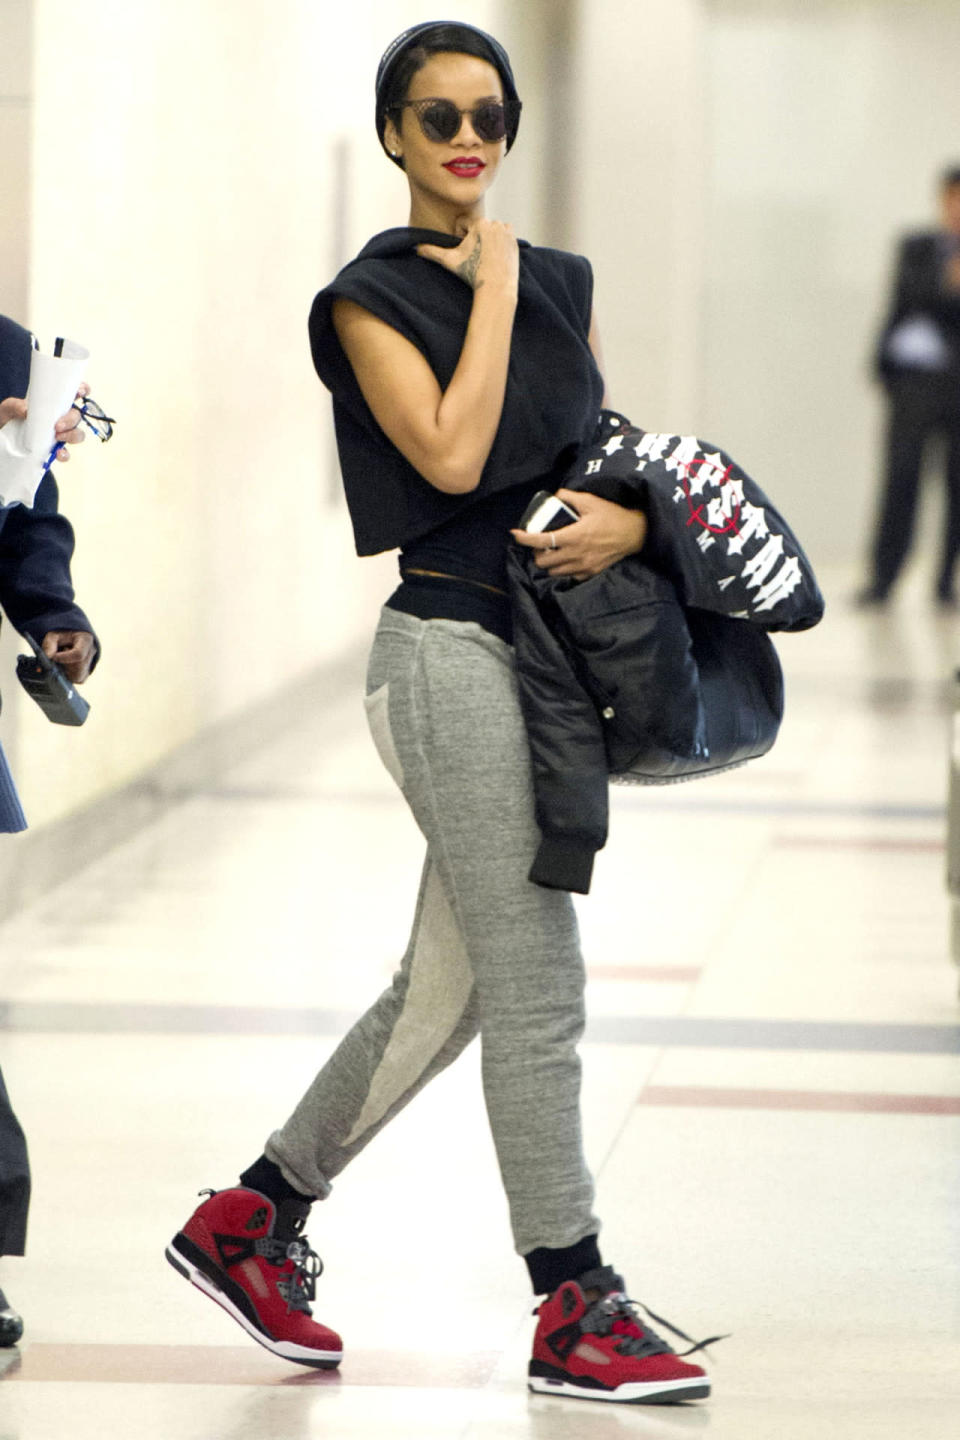 Rihanna adds a red lip and matching kicks to take her loungewear to its cutest possible conclusion.